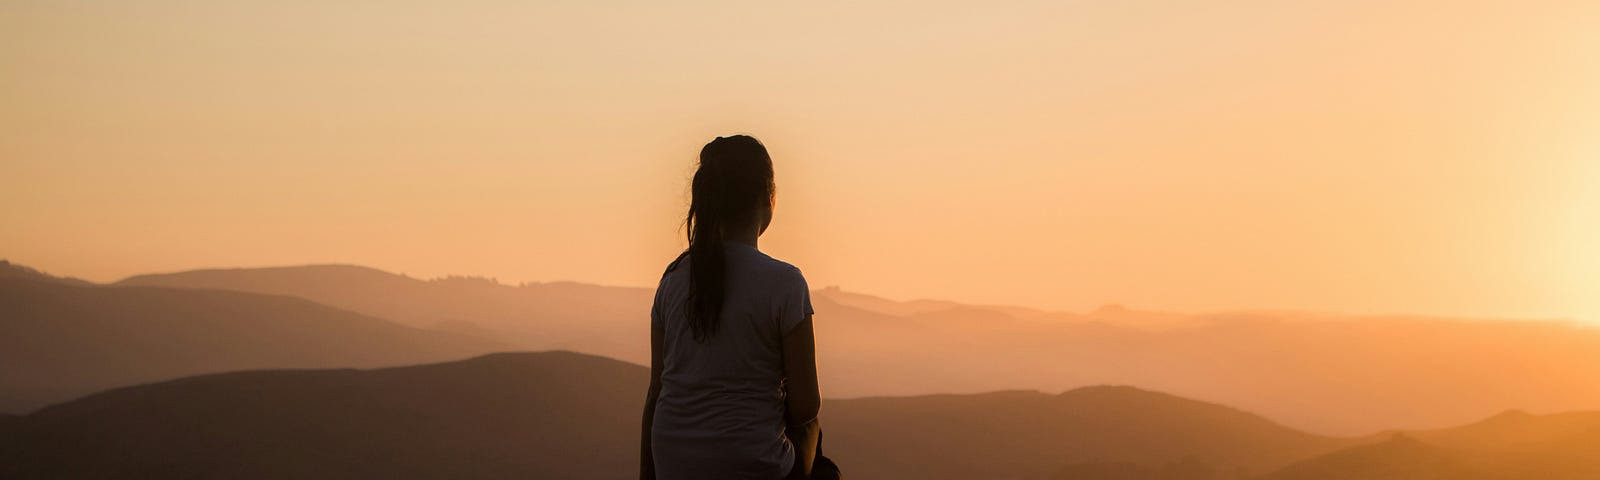 The silhouette of a woman sitting on a bench looking across a range of mountains in the sunset